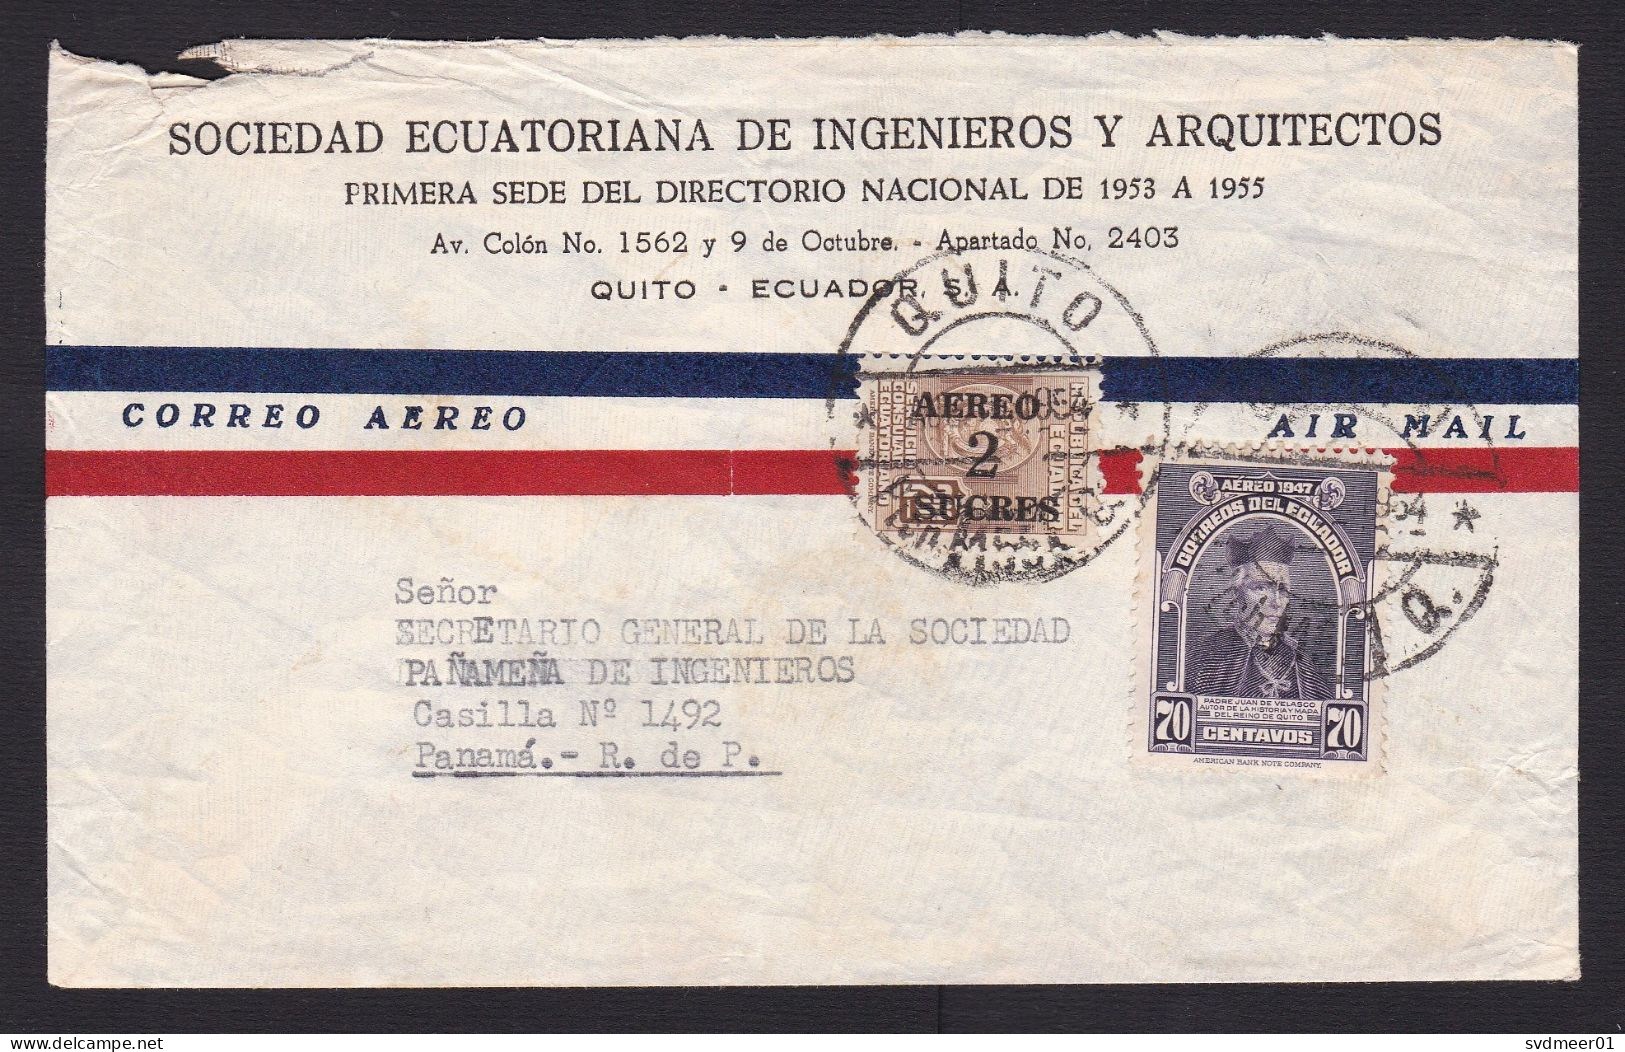 Ecuador: Airmail Cover To Panama, 1954, 2 Stamps, Value Overprint, Cancel Received In This Condition (minor Damage) - Ecuador